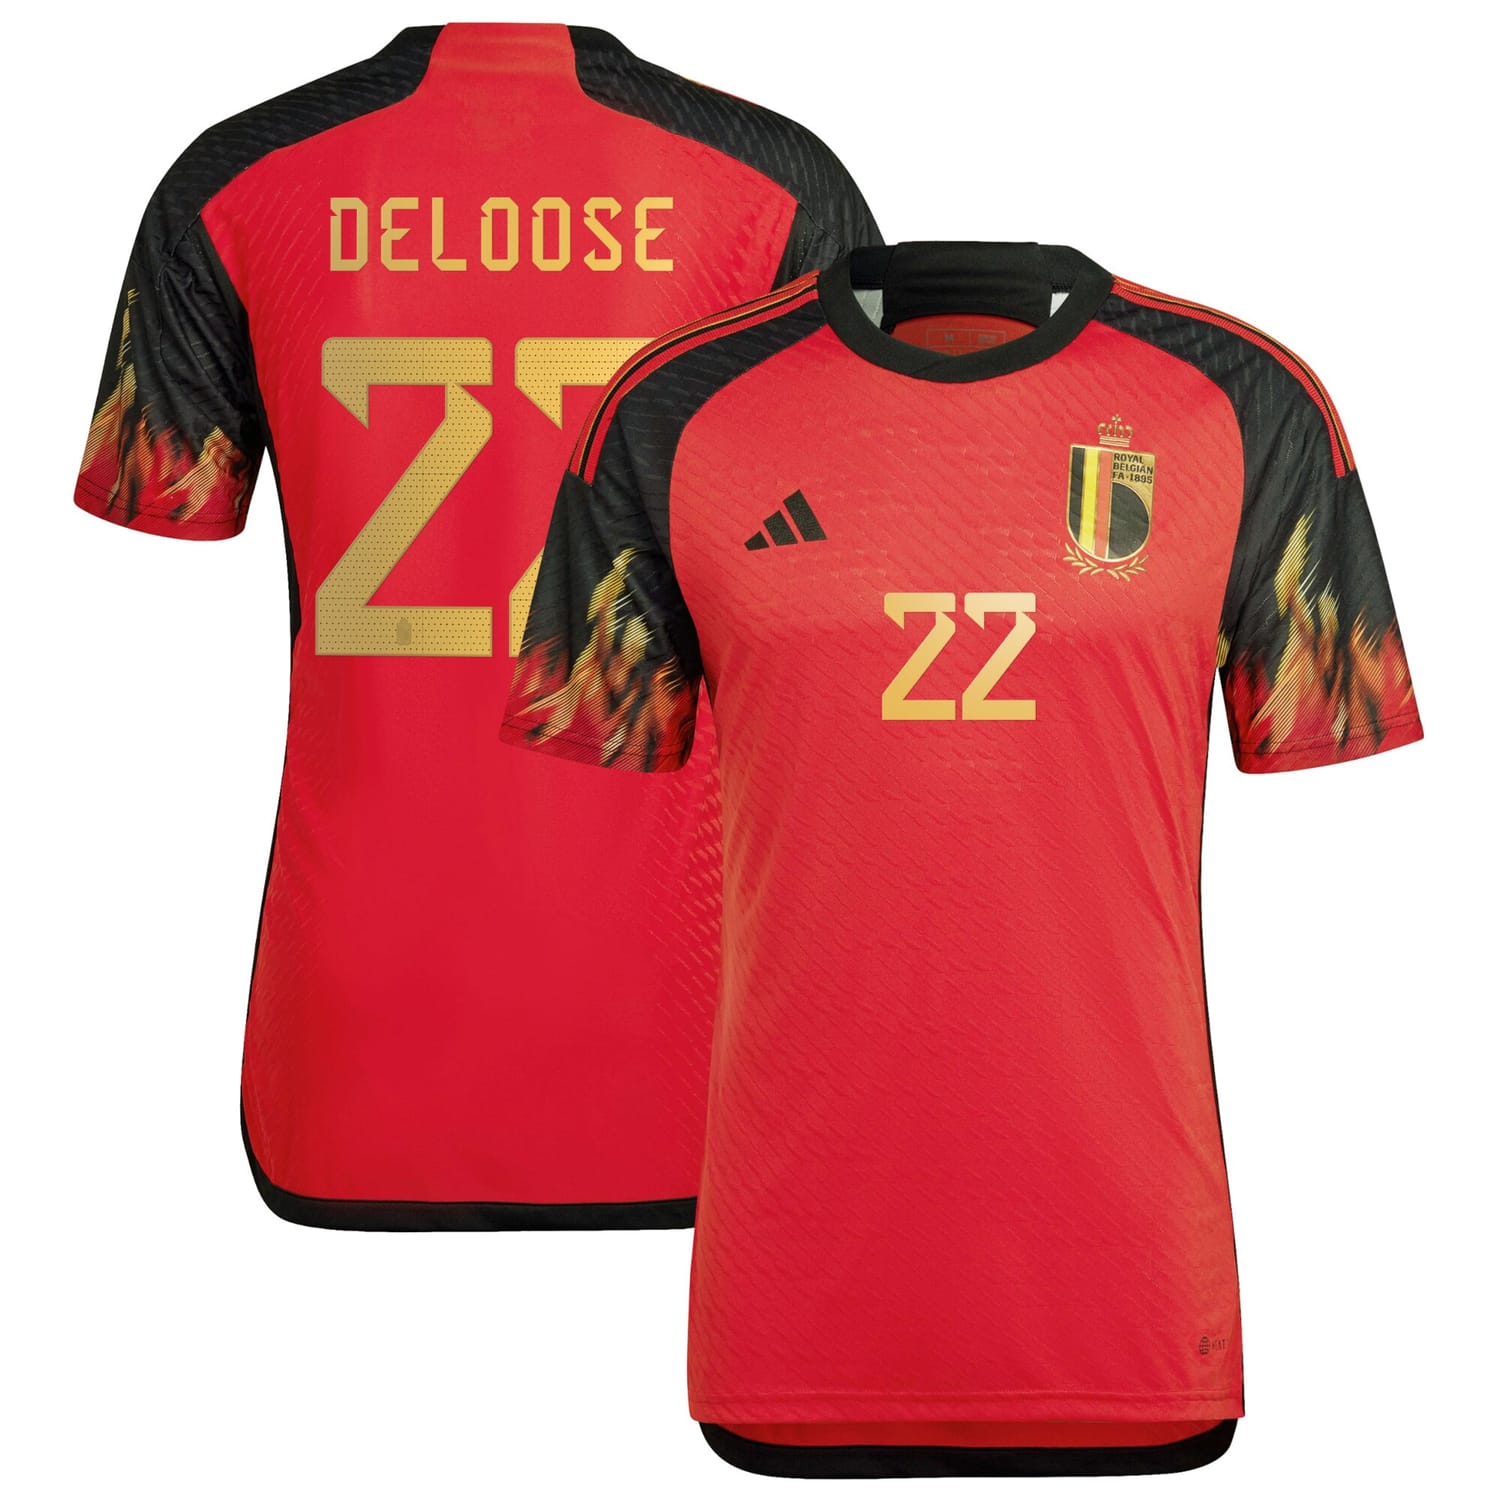 Belgium National Team Home Authentic Jersey Shirt 2022 player Laura Deloose 22 printing for Men